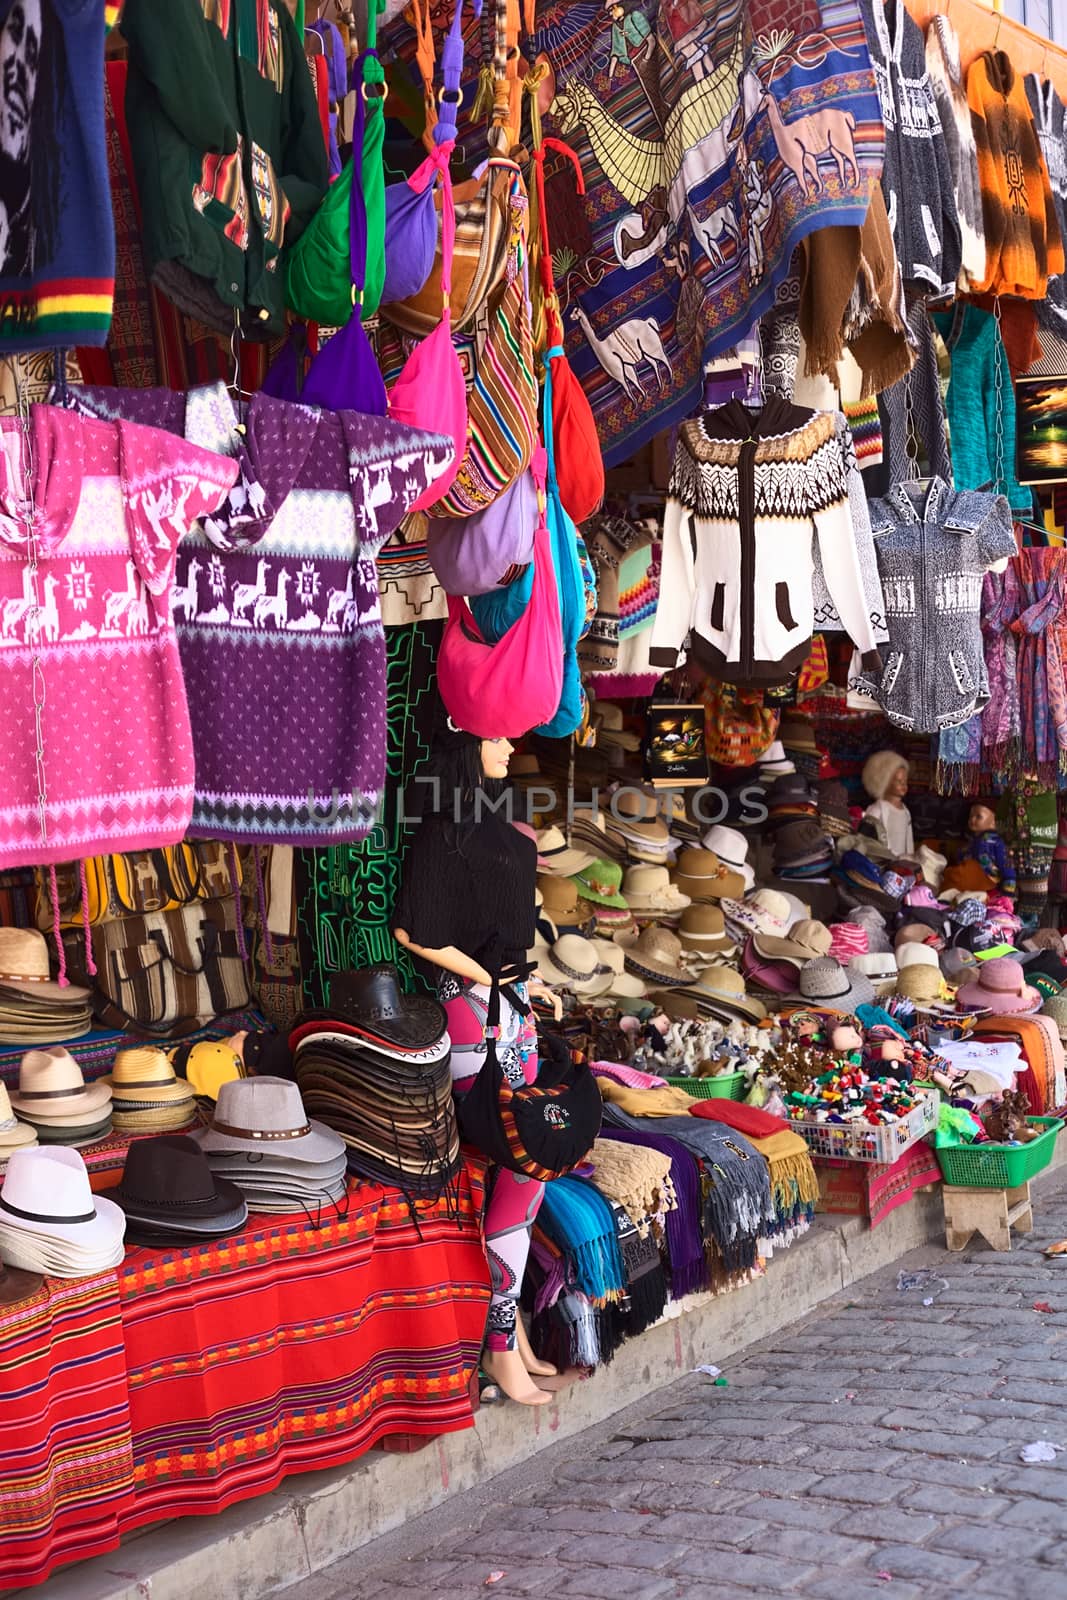 COPACABANA, BOLIVIA - OCTOBER 19, 2014: Hats, sweaters, scarves and bags at souvenir and handicraft shop in the small tourist town on the shore of Lake Titicaca on October 19, 2014 in Copacabana, Bolivia (Selective Focus, Focus on the front of the image)